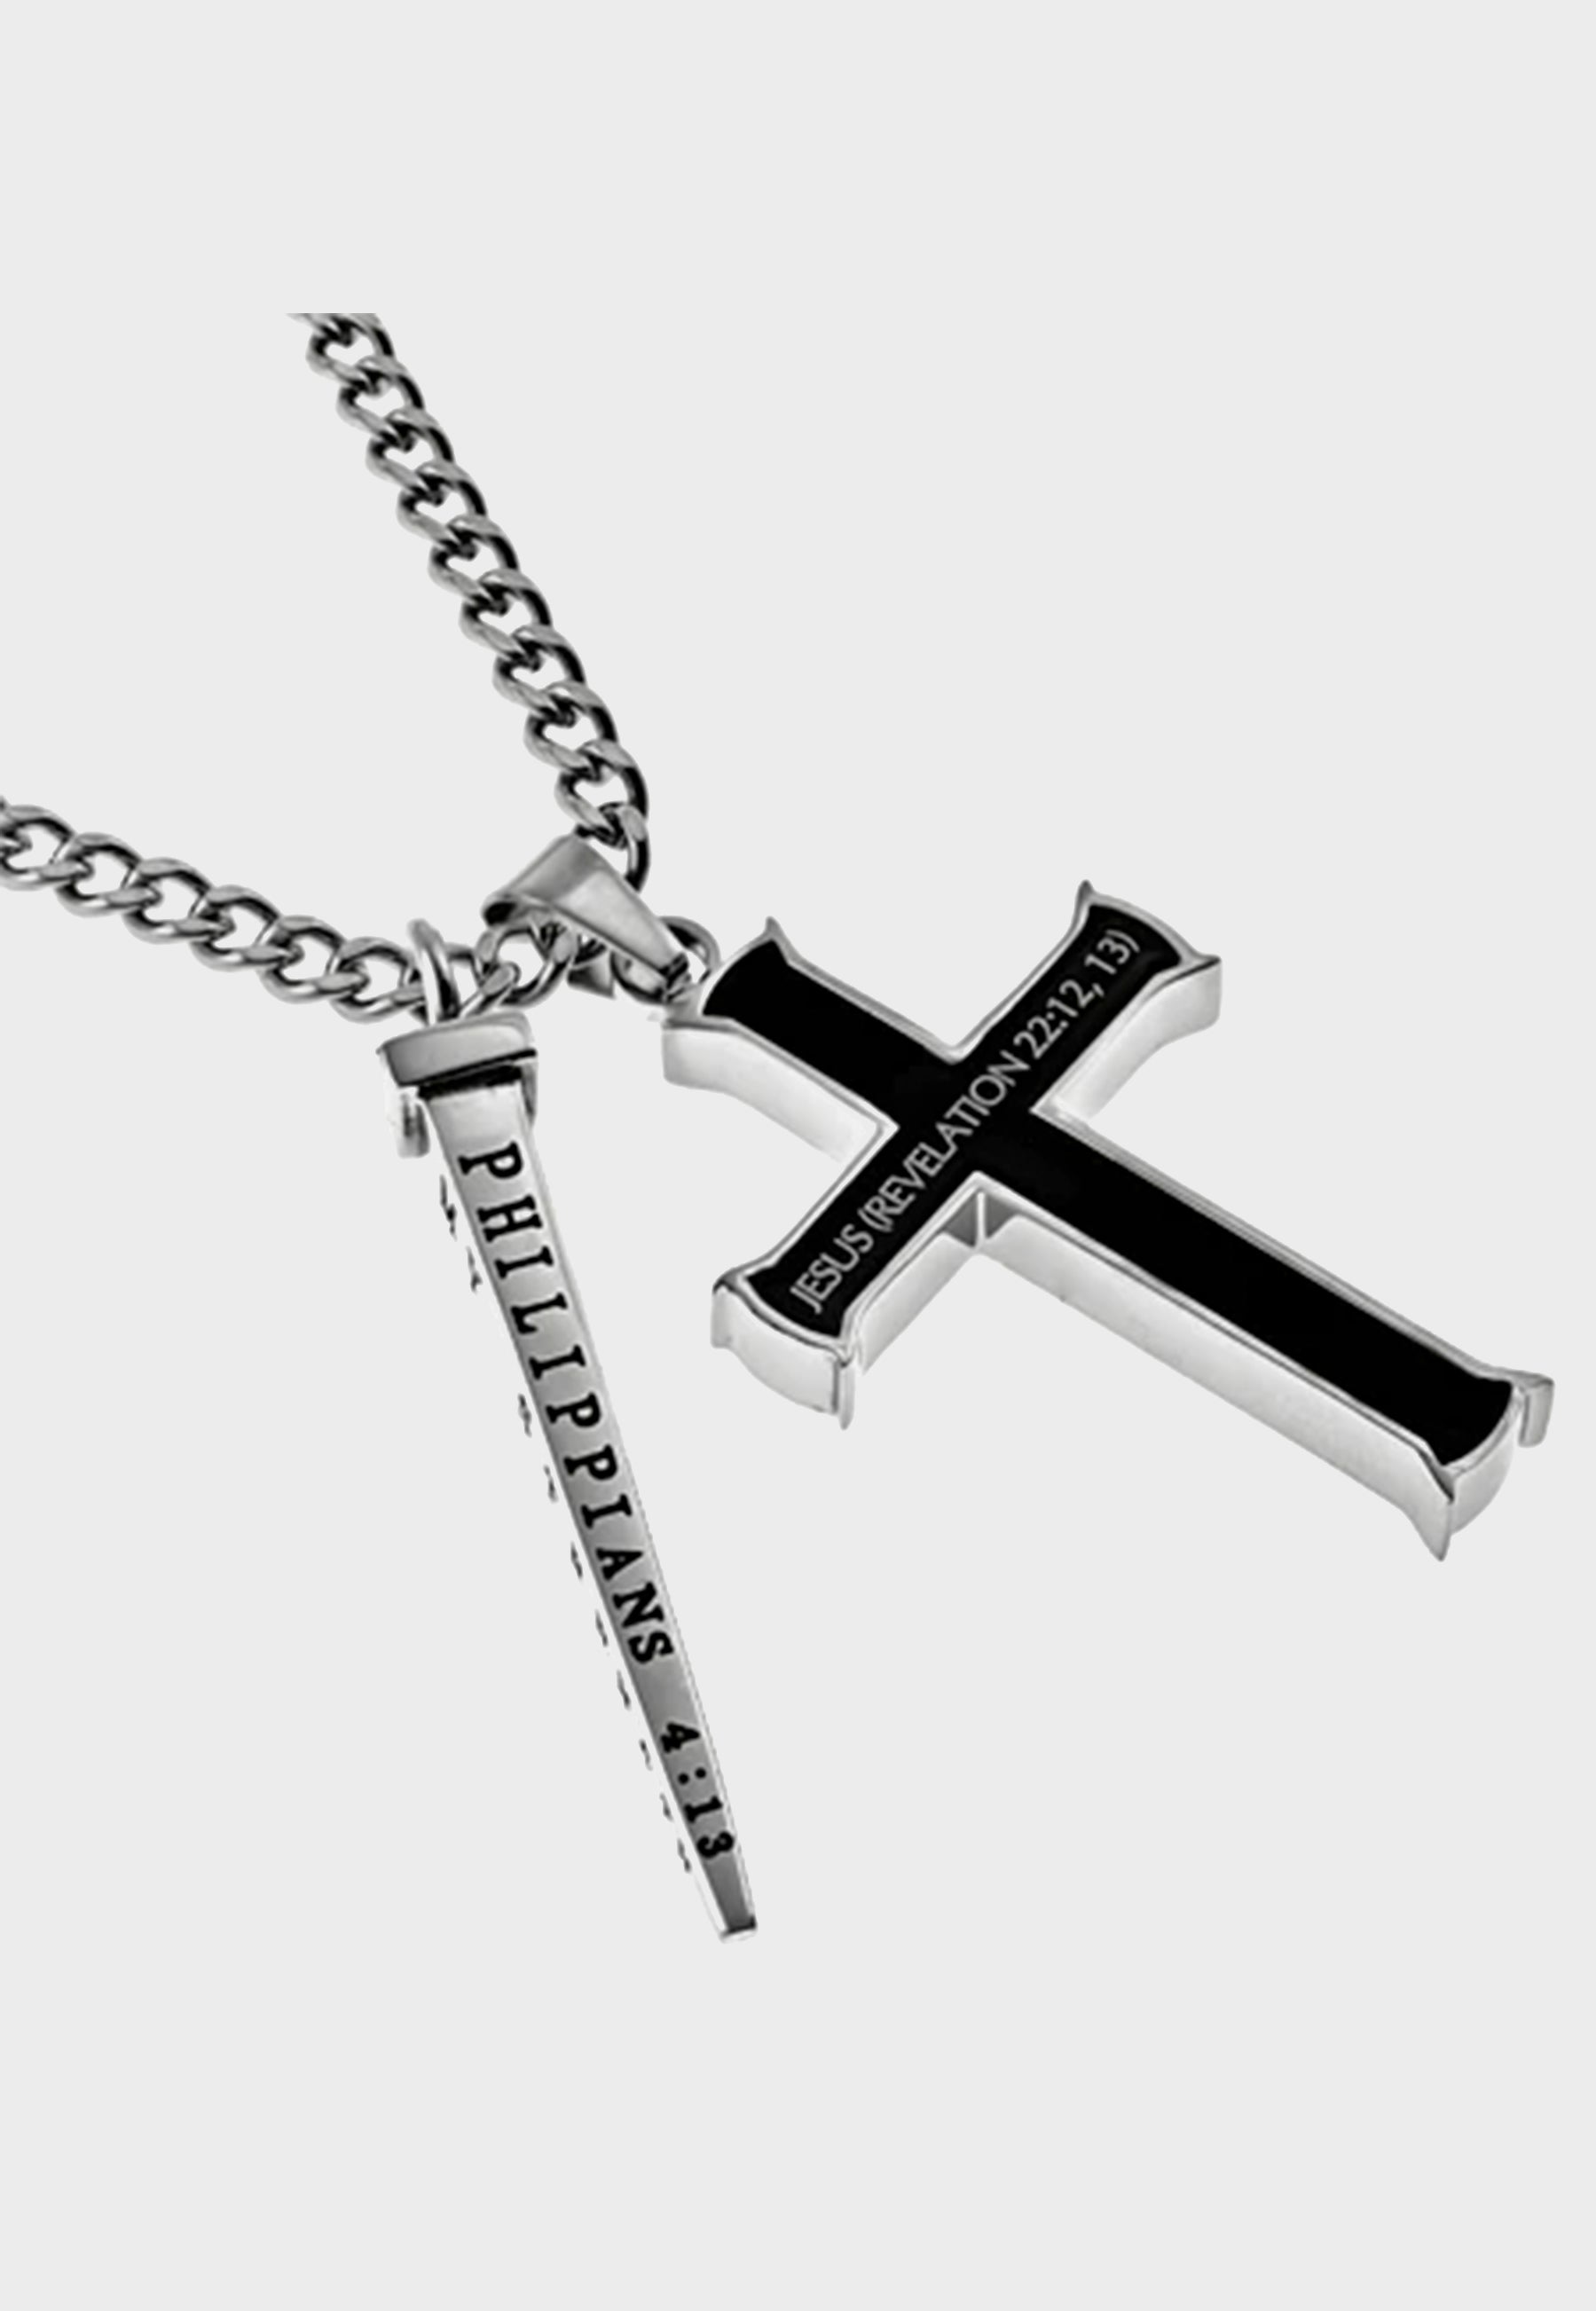 Men's Christian cross and nail necklace with Bible verses